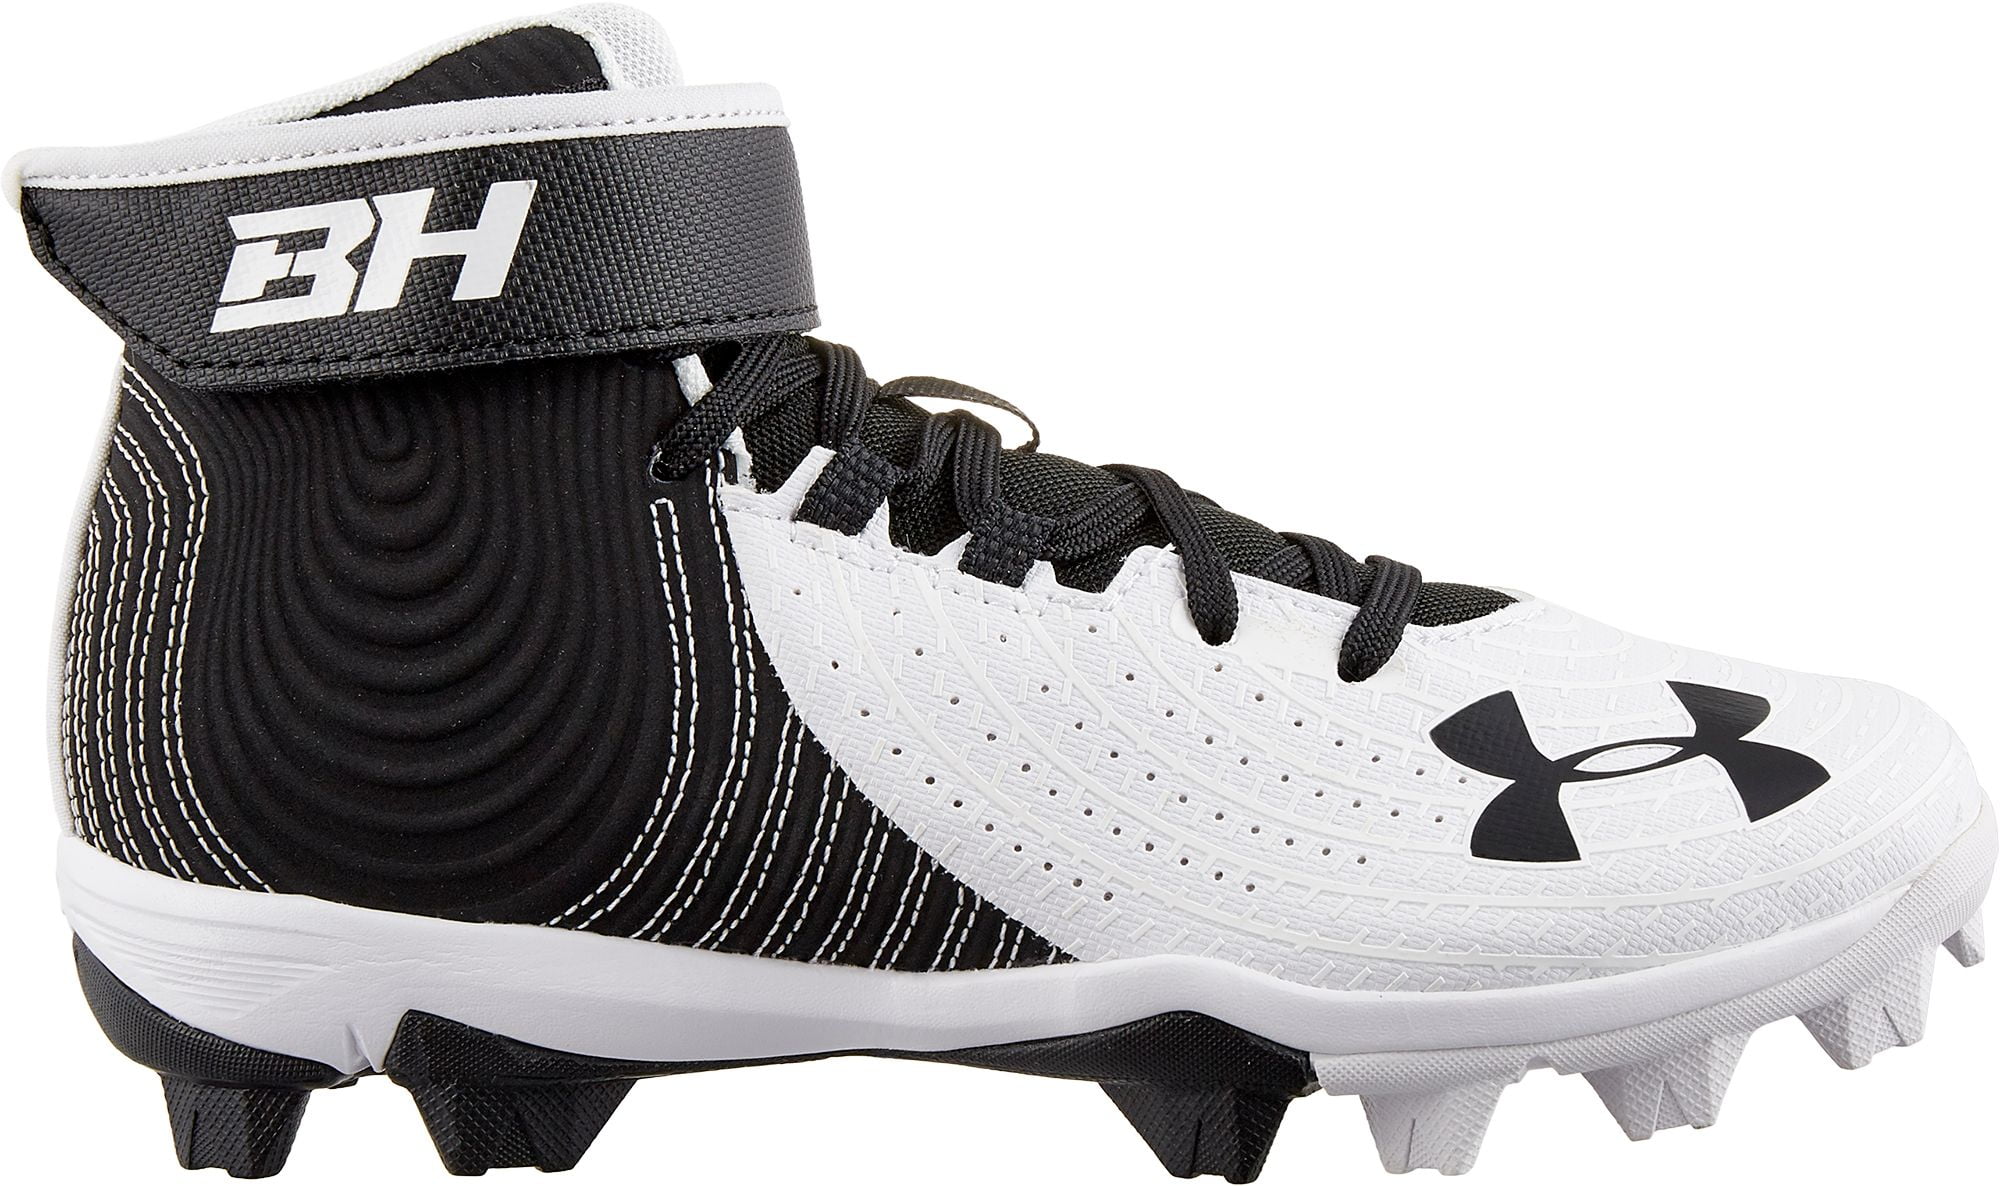 Under Armour Harper 3 Mid Molded Baseball Cleats NEW Men's Size 8 BLACK/NEON 